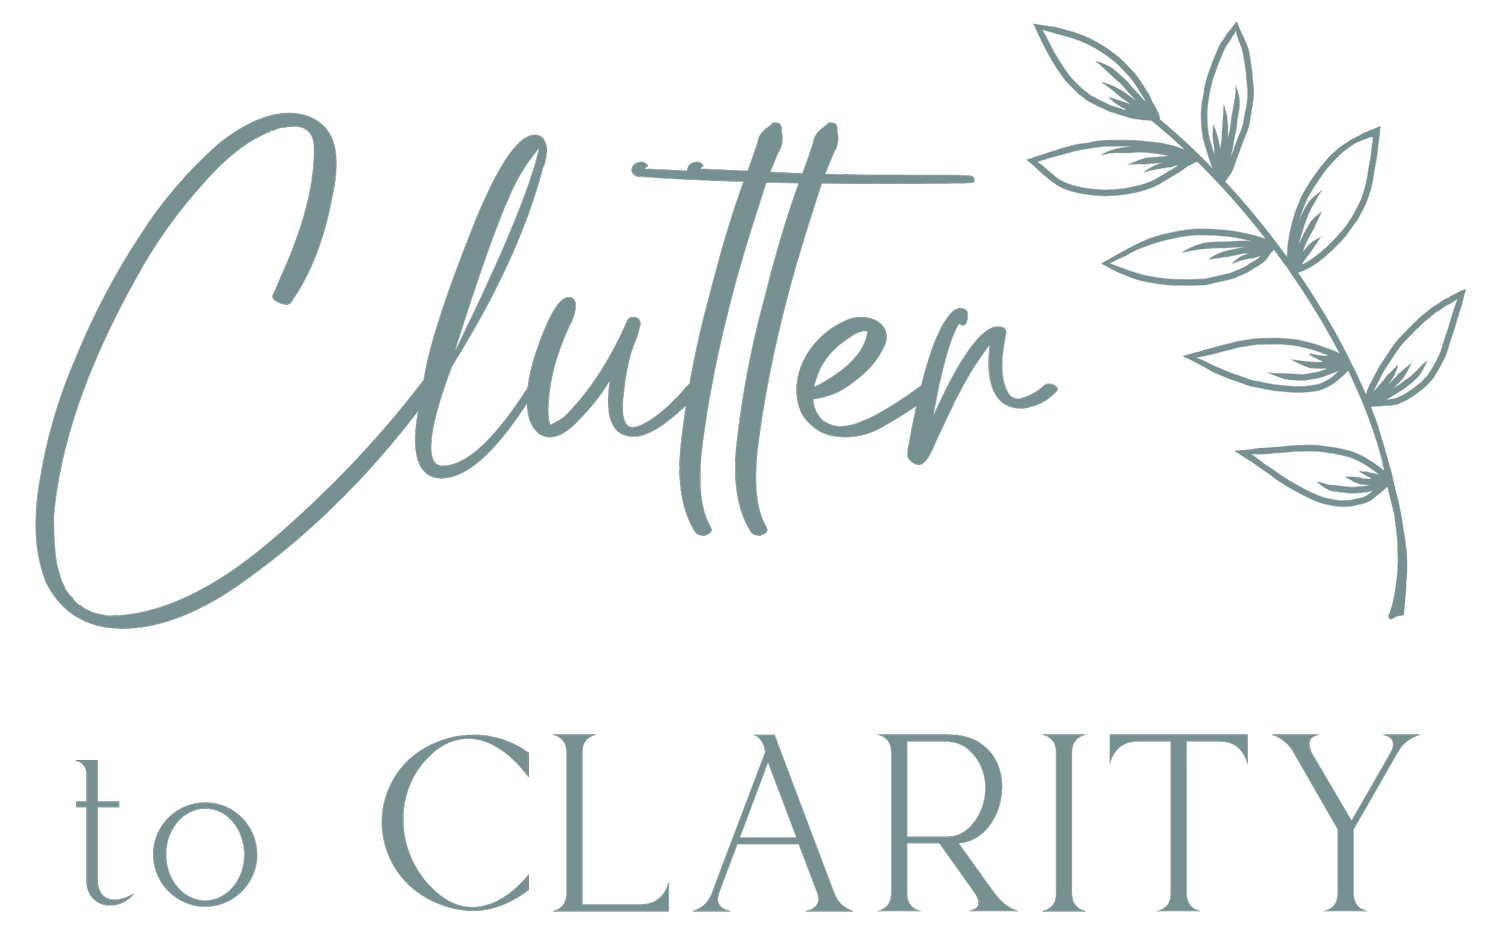 Clutter to Clarity Home Organizing